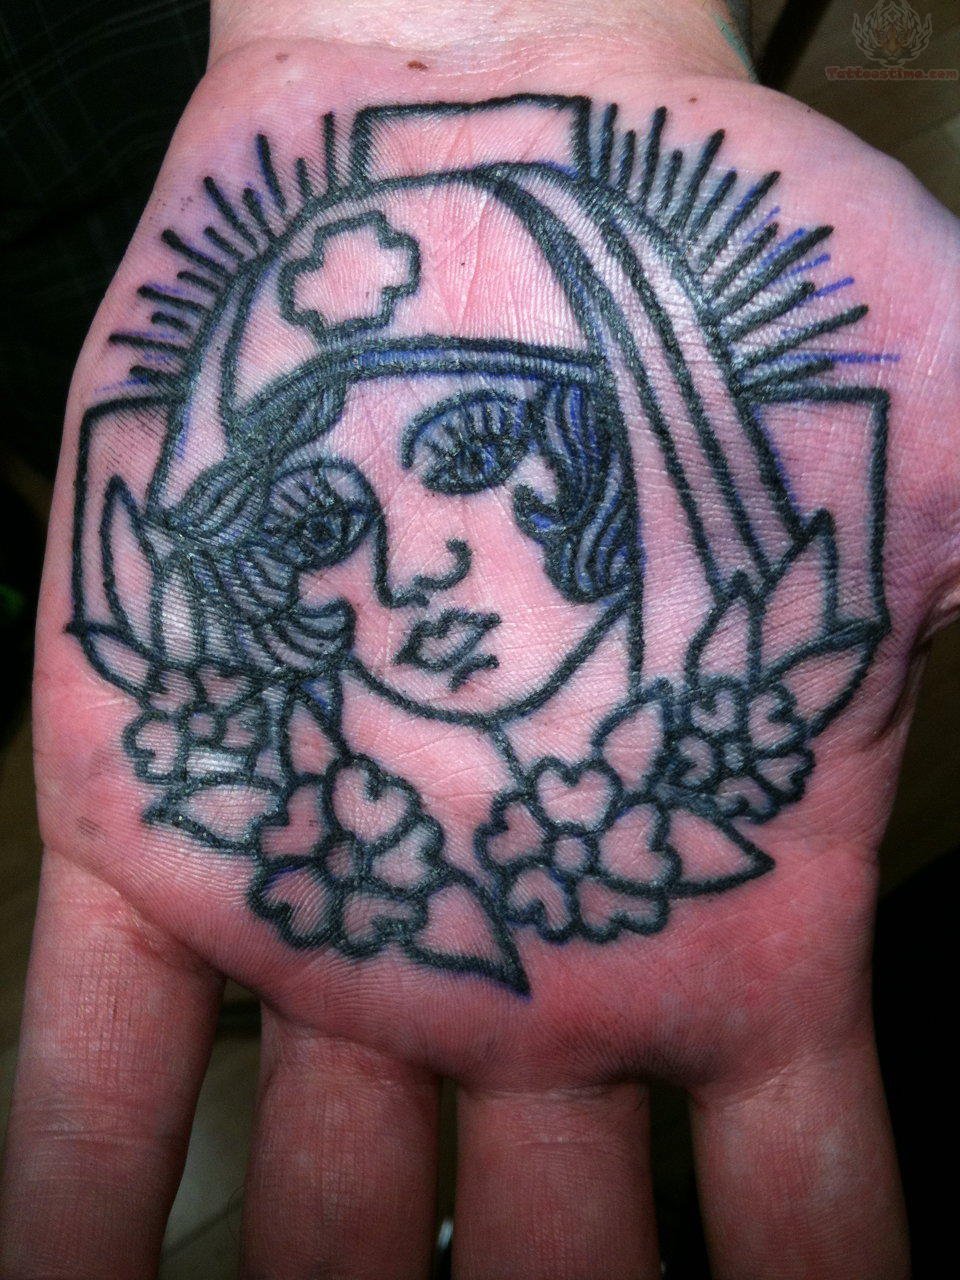 Black Nurse Face With Flowers Tattoo On Hand Palm